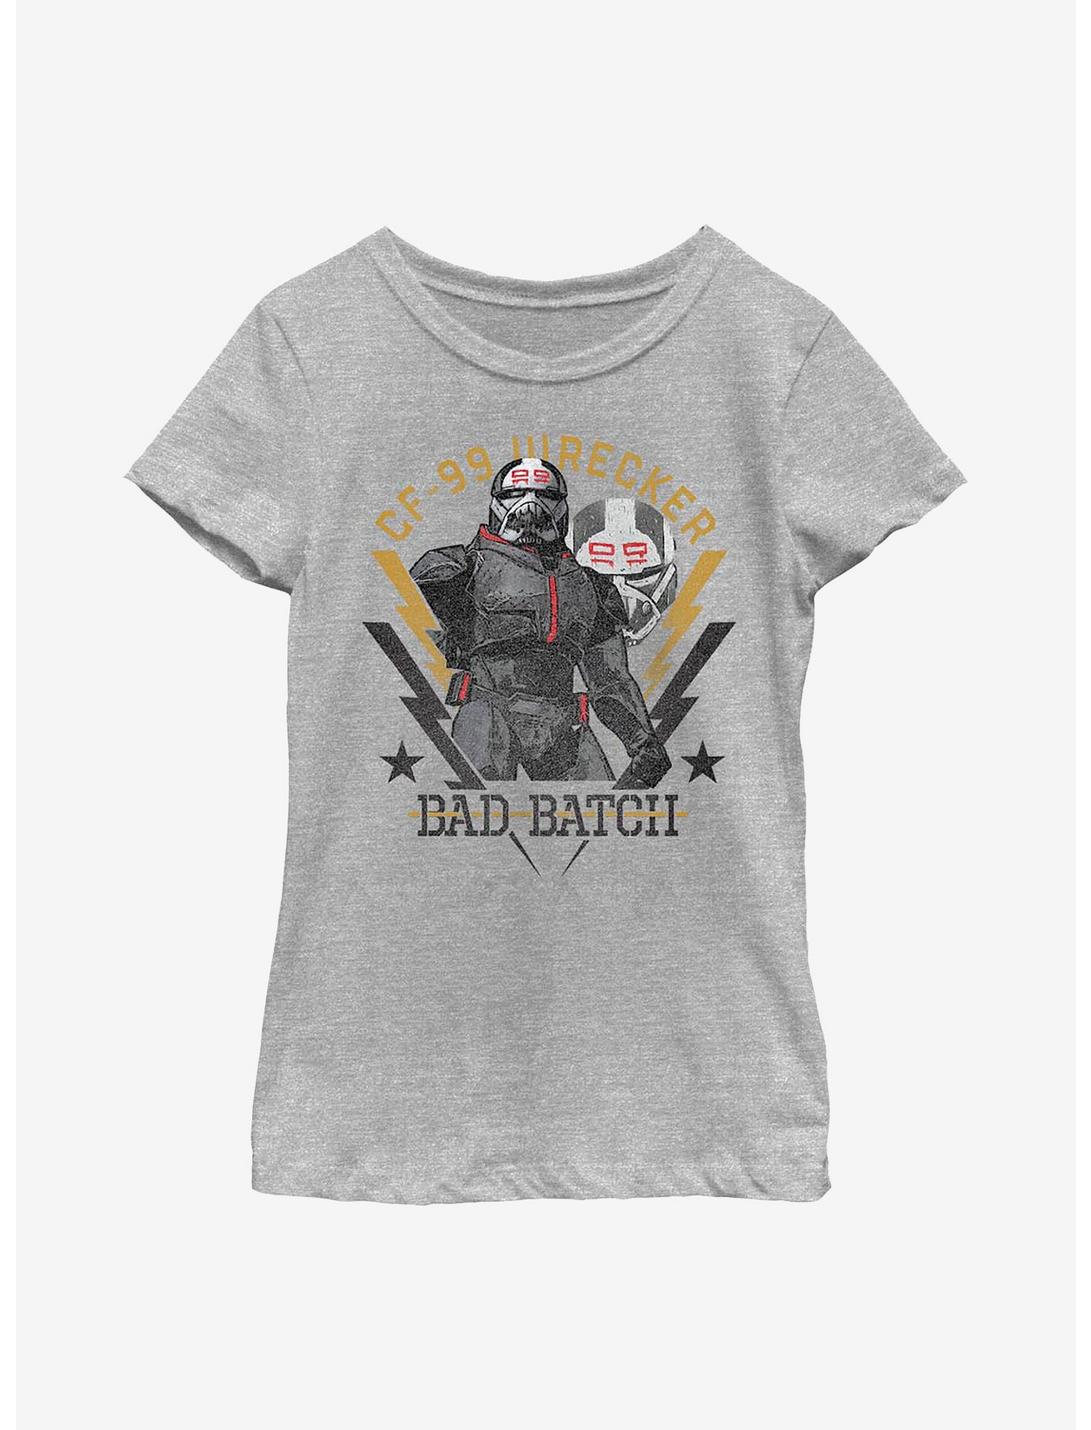 Star Wars: The Bad Batch Wrecker Army Crate Youth Girls T-Shirt, ATH HTR, hi-res